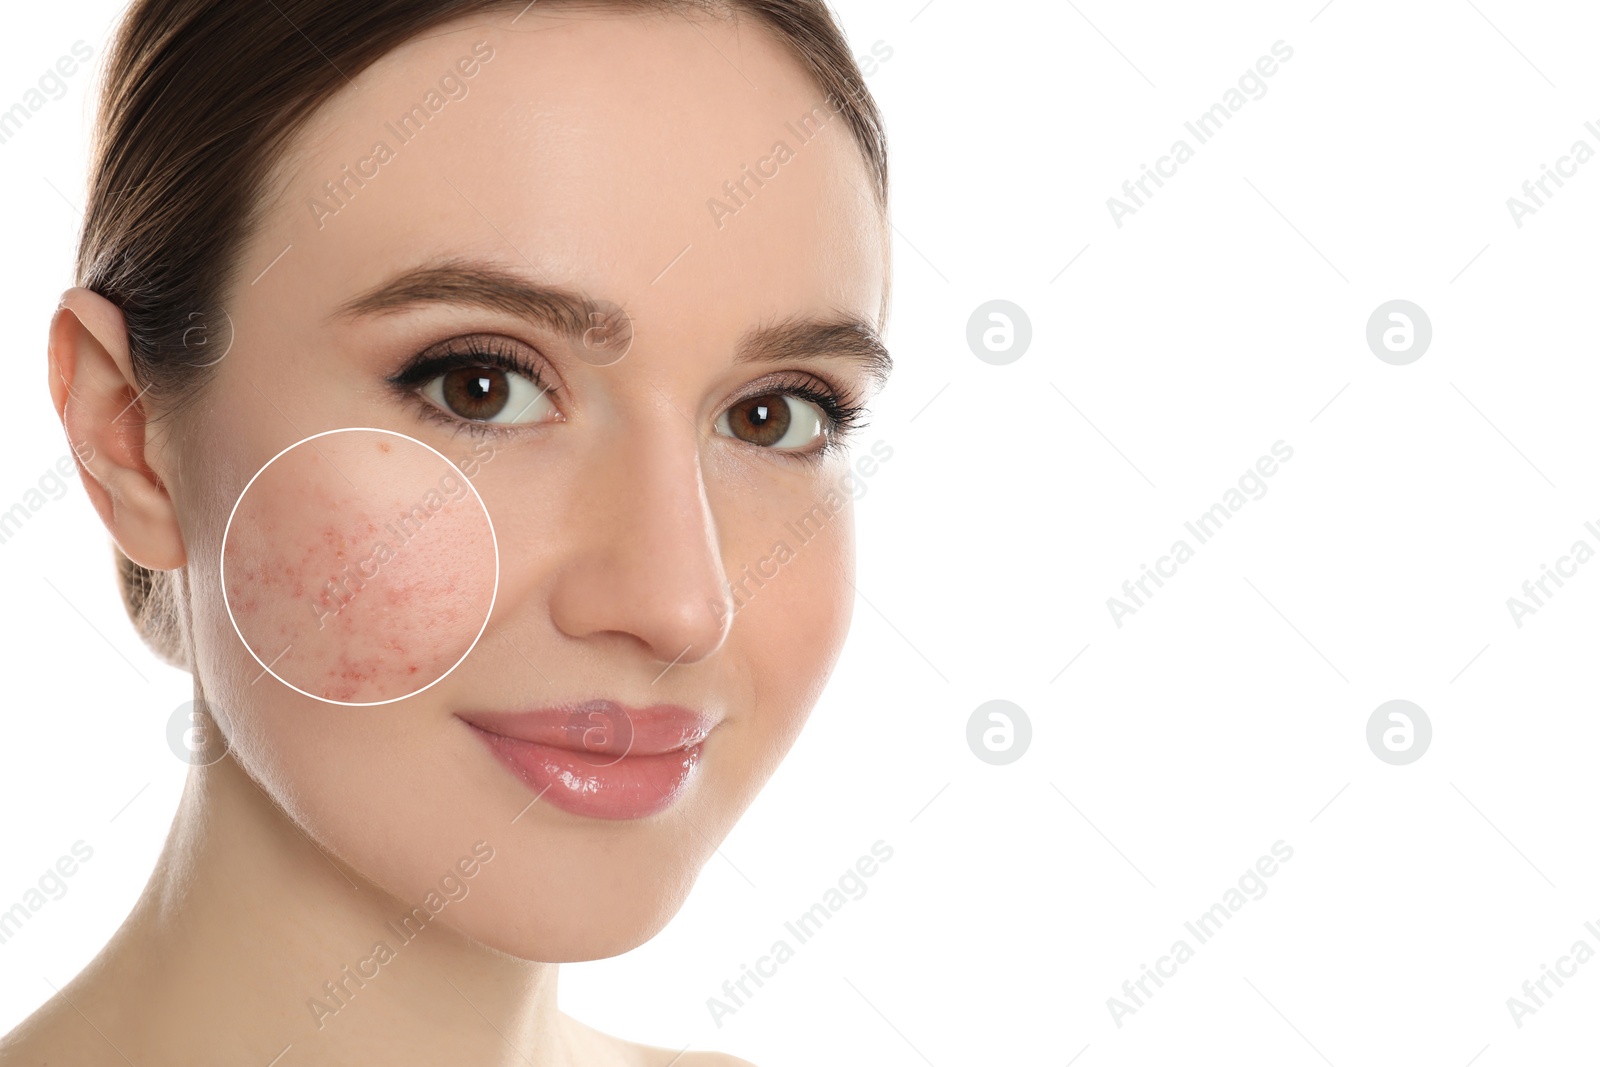 Image of Dermatology. Woman with skin problem on white background. Zoomed area showing acne